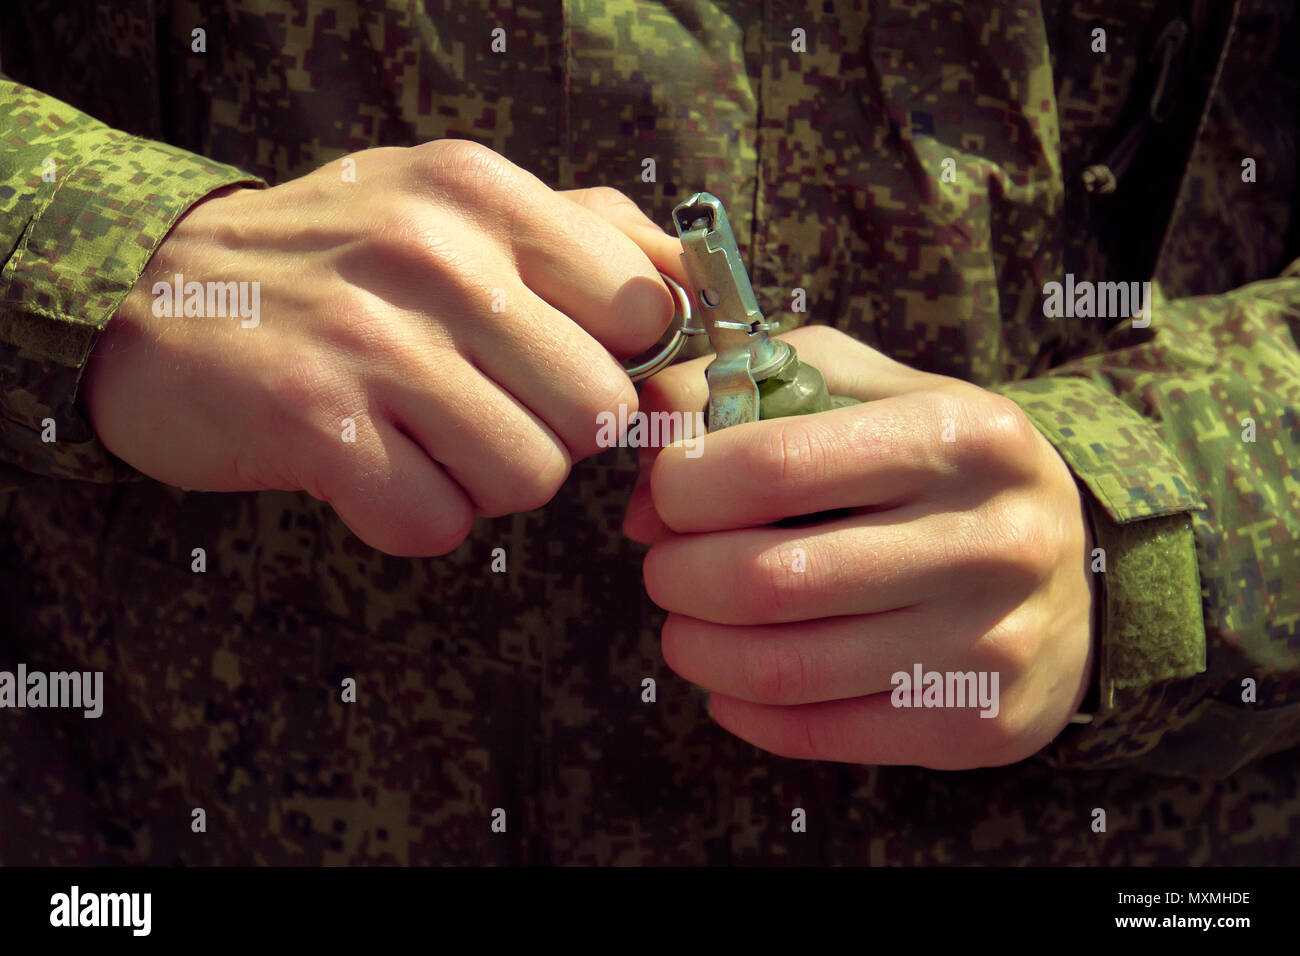 Grenade, Hands on Pin. the soldier pulls a check from a fragmentation grenade RGD-5. Self-explosion. Stock Photo